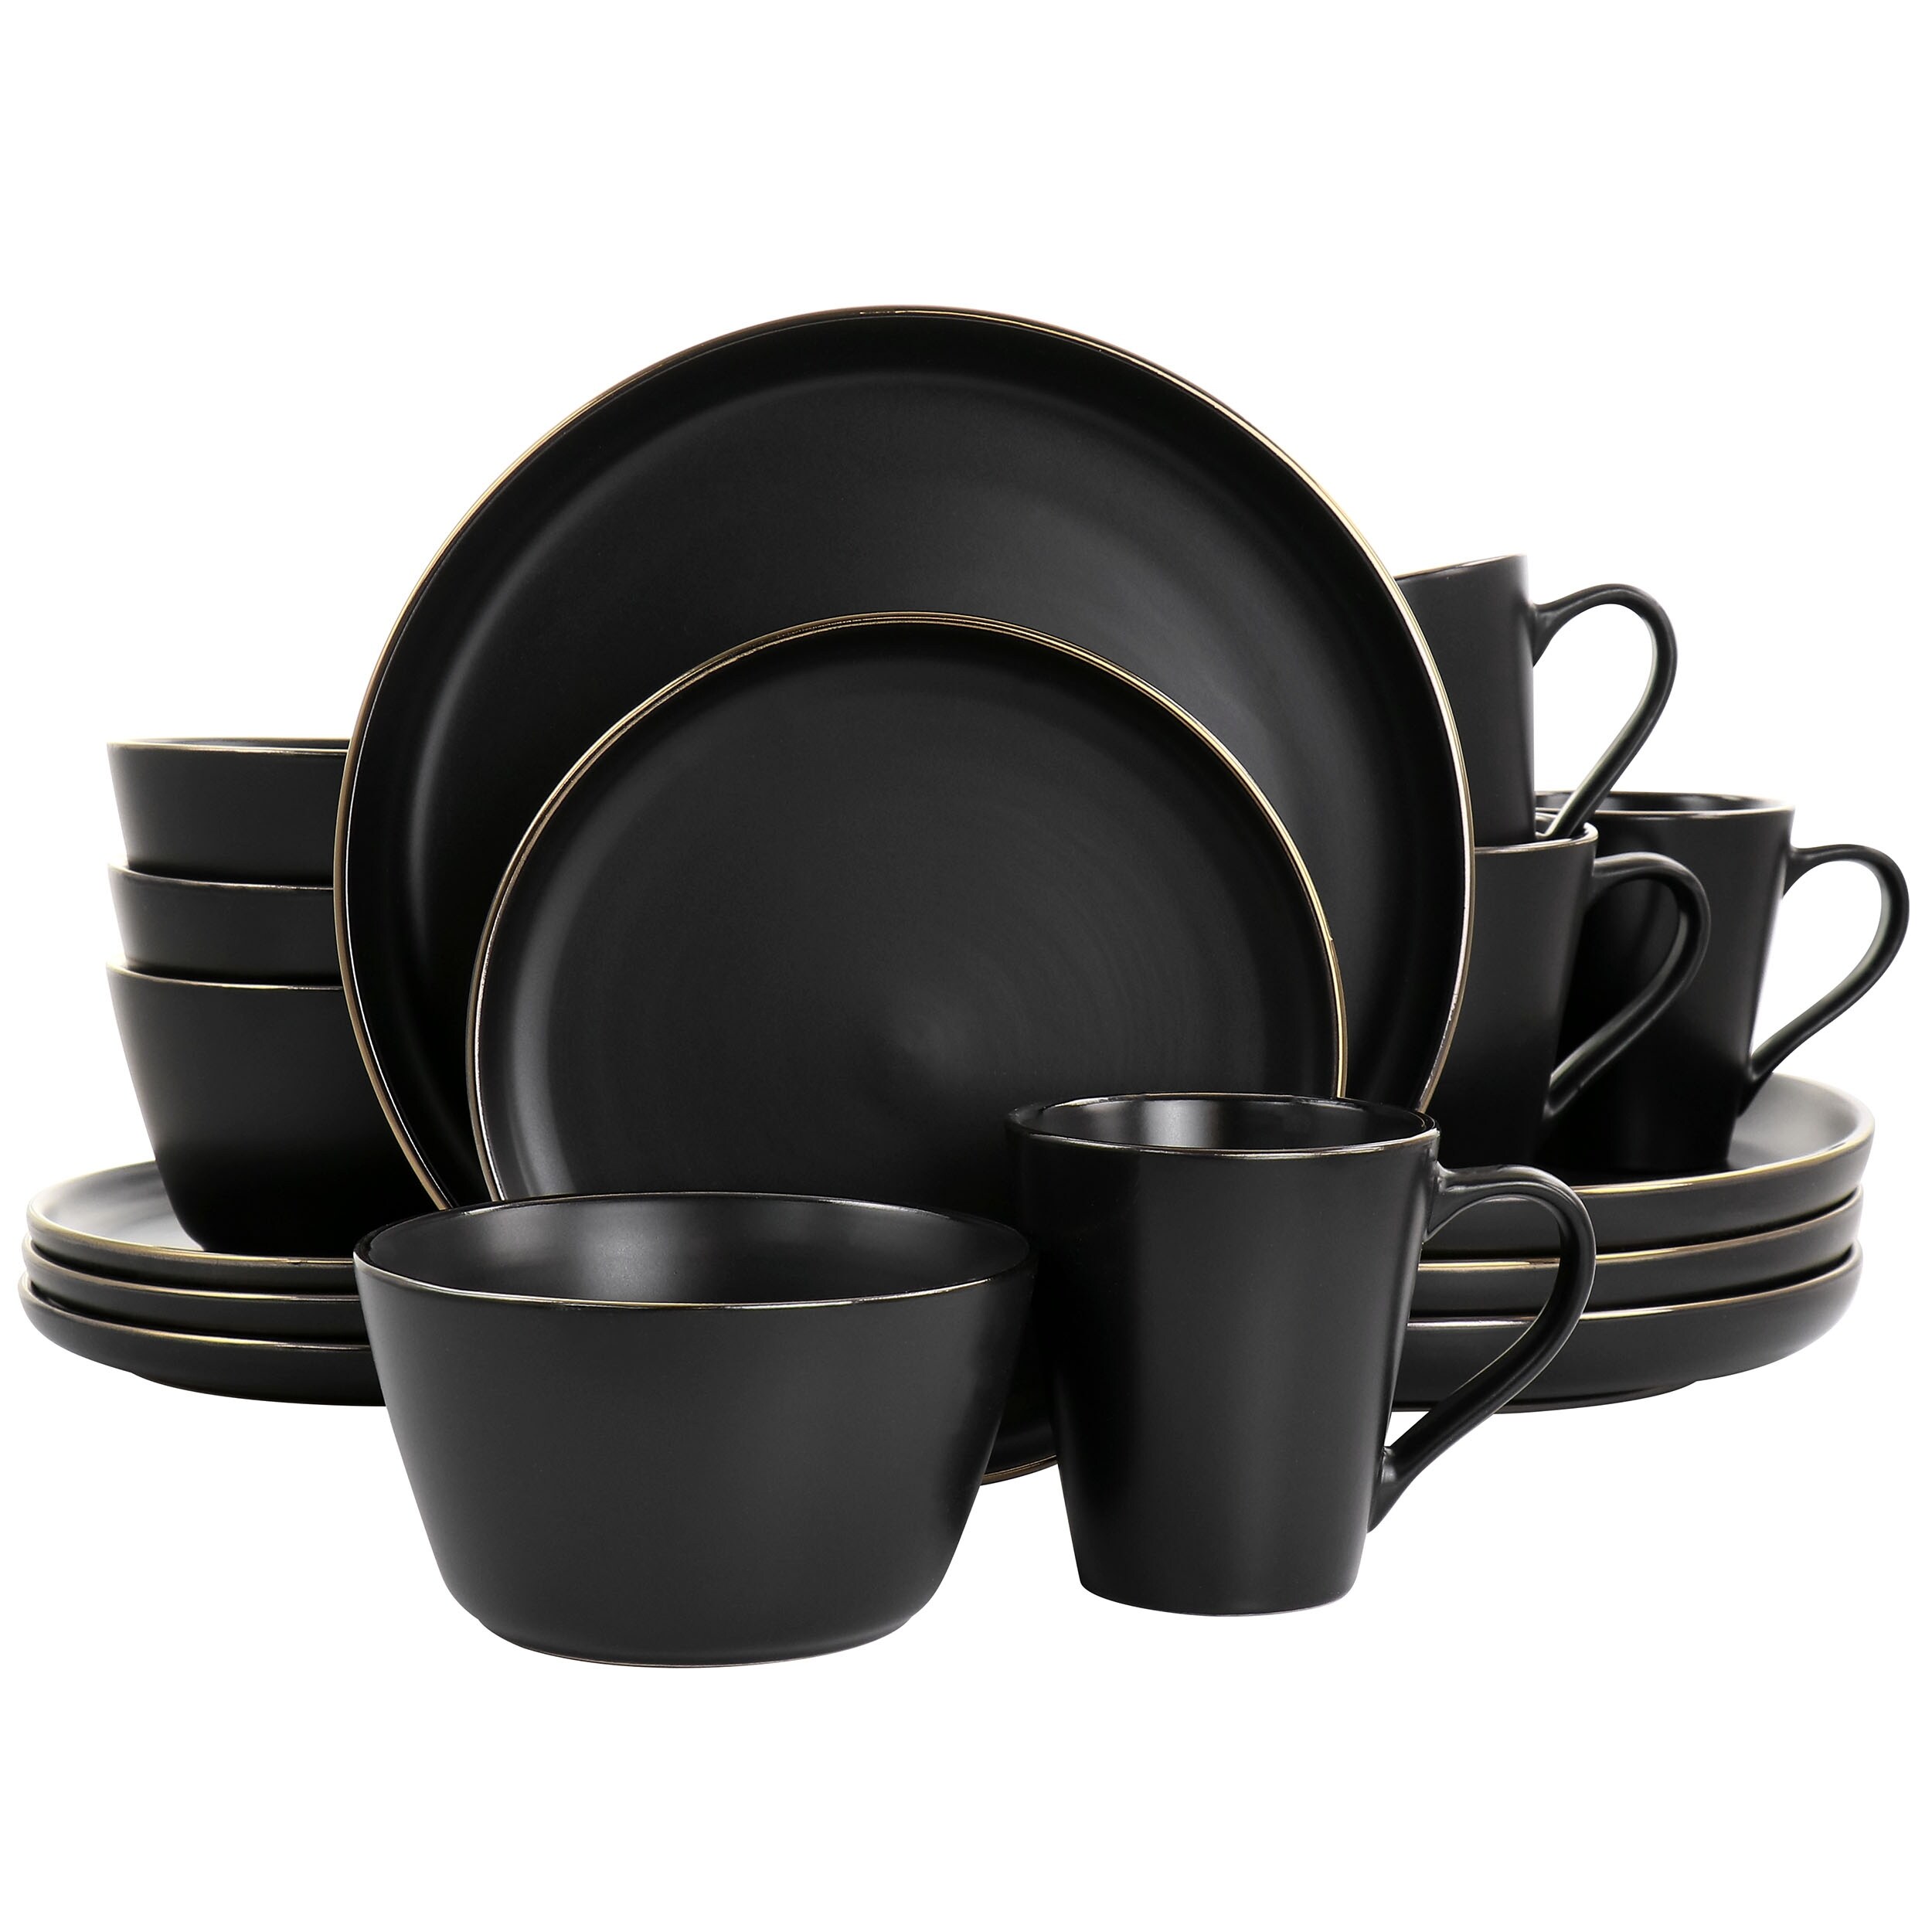 https://ak1.ostkcdn.com/images/products/is/images/direct/57e68230f82092a1587900f7b85750911304424f/Elama-Paul-16-Piece-Stoneware-Dinnerware-Set-in-Matte-Black-with-Gold-Rim.jpg